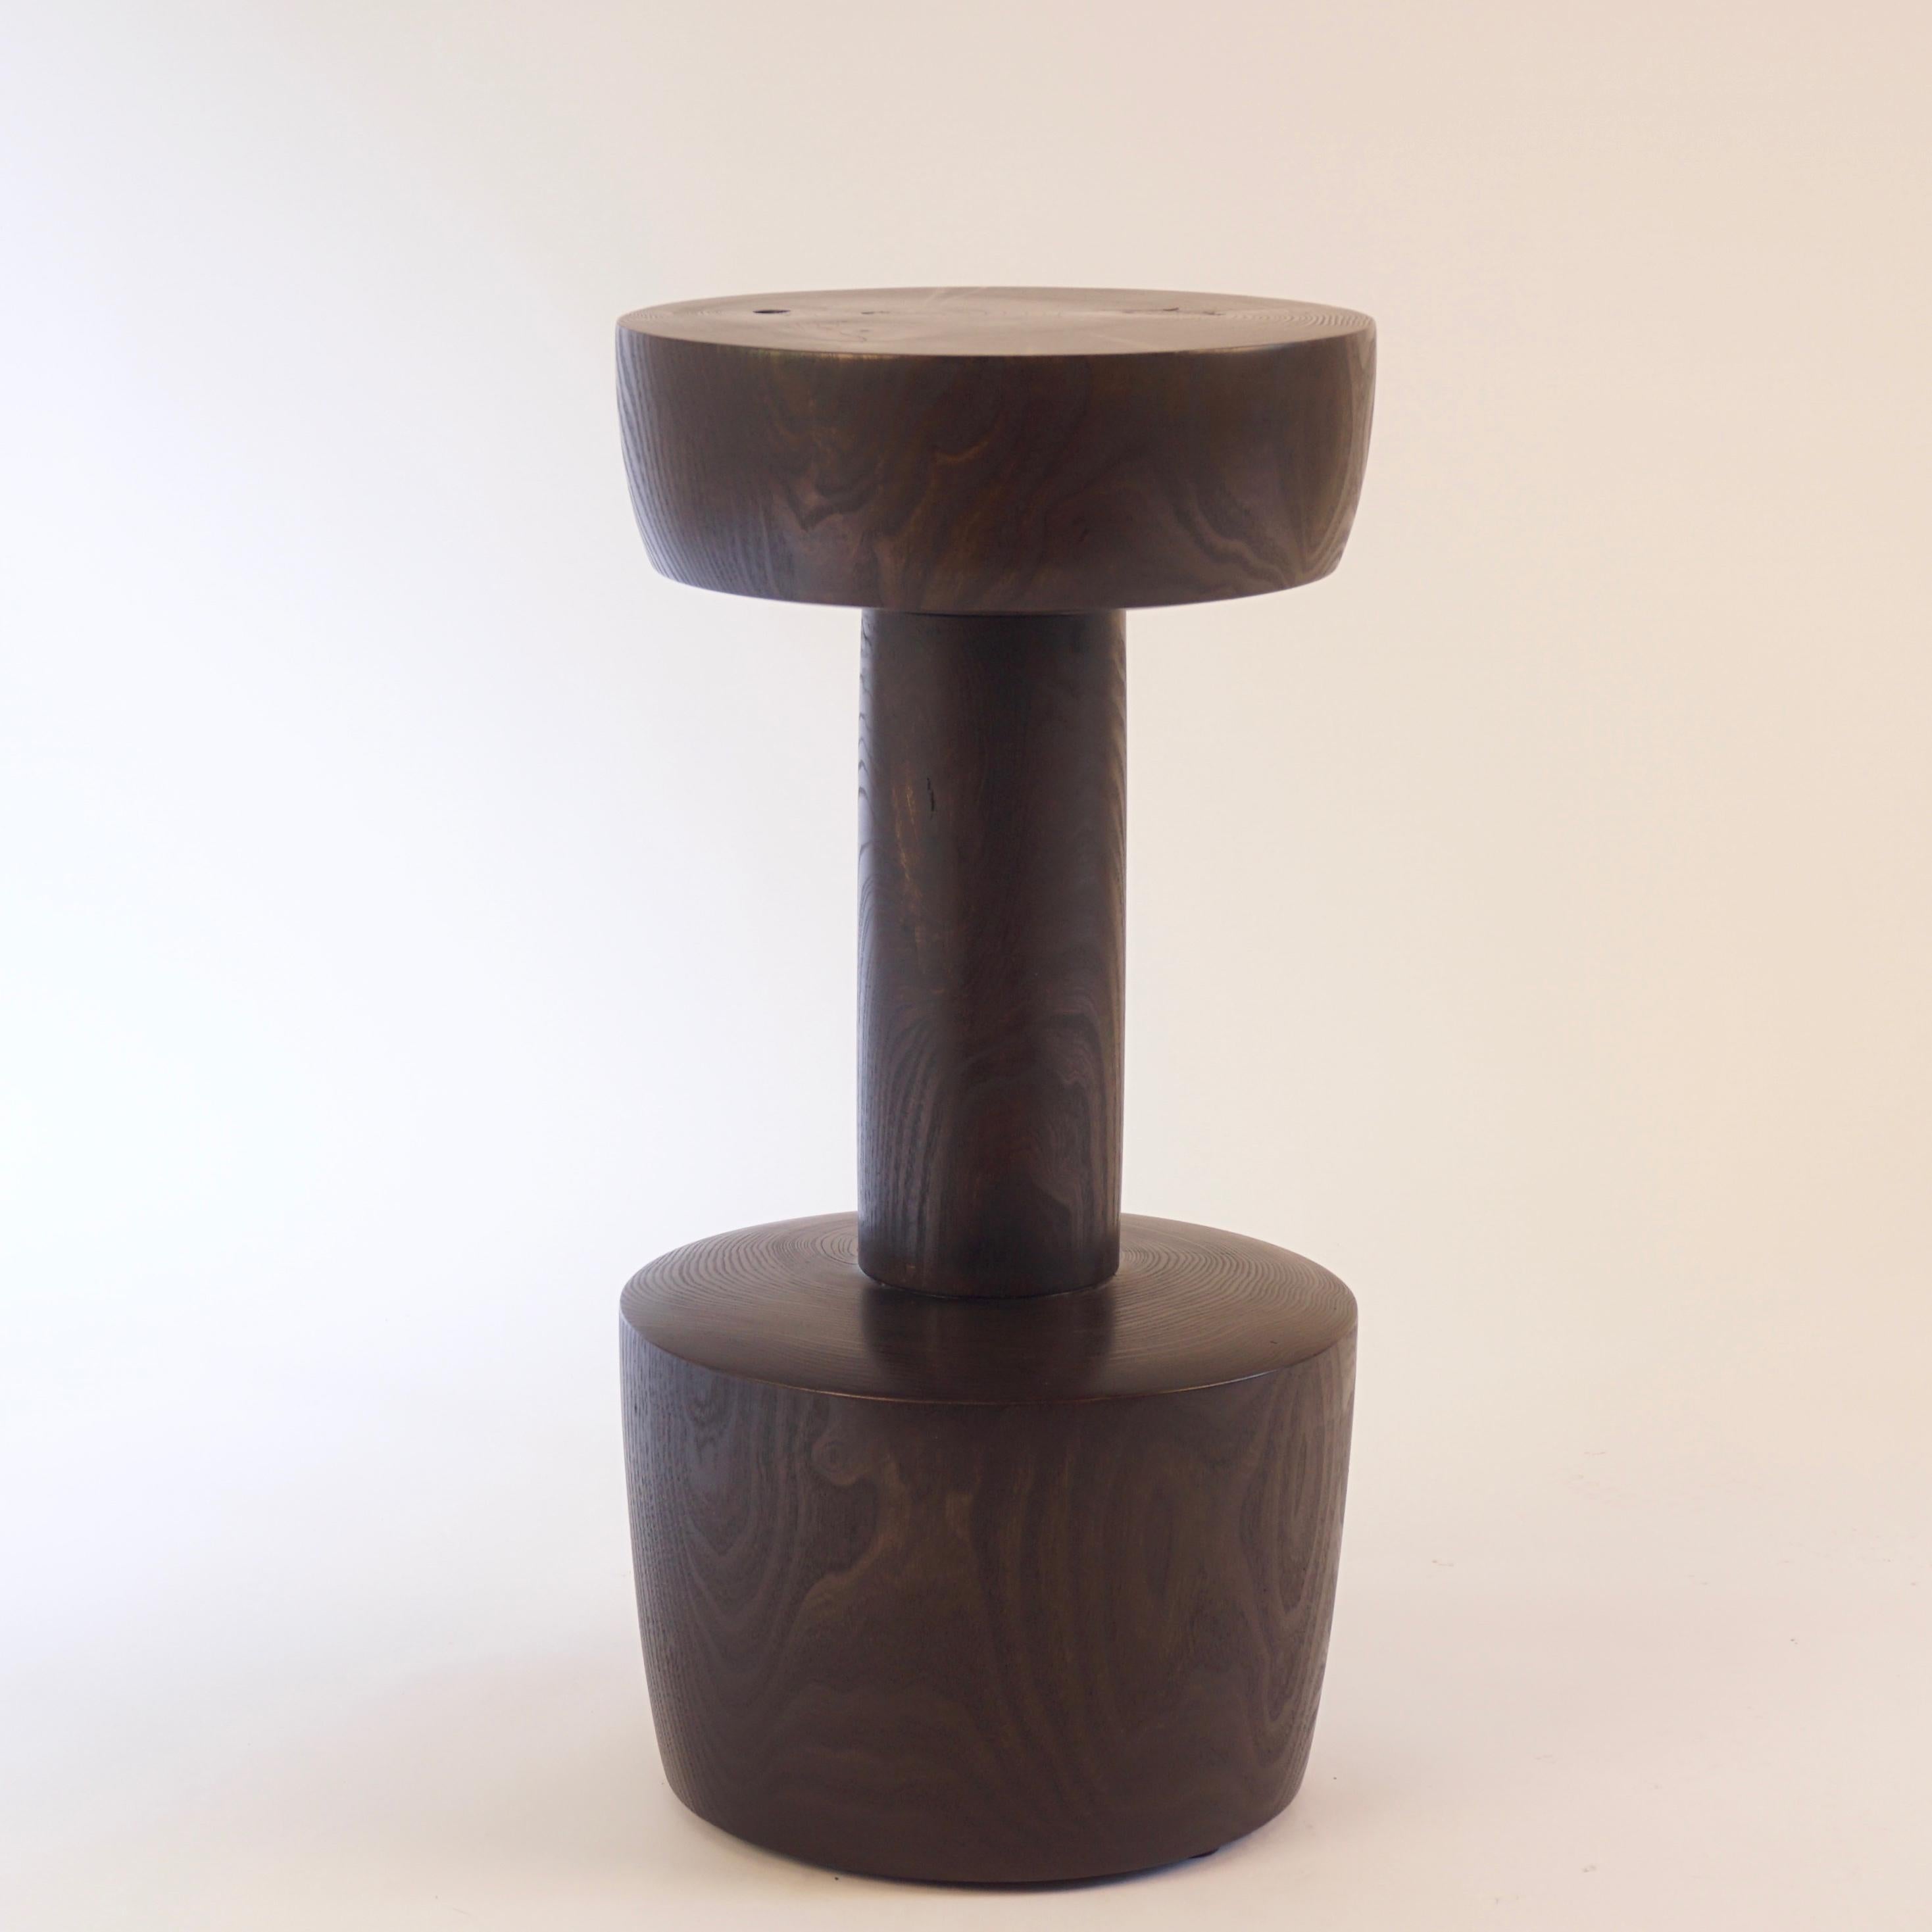 This custom version of the #14 Pedestal, one of the ten original shapes in the Lehrecke Pedestal collection from 1996, is ebonised catalpa, made from a log from the Hudson Valley, in New York State.

All of Lehrecke's Pedestals are made on a